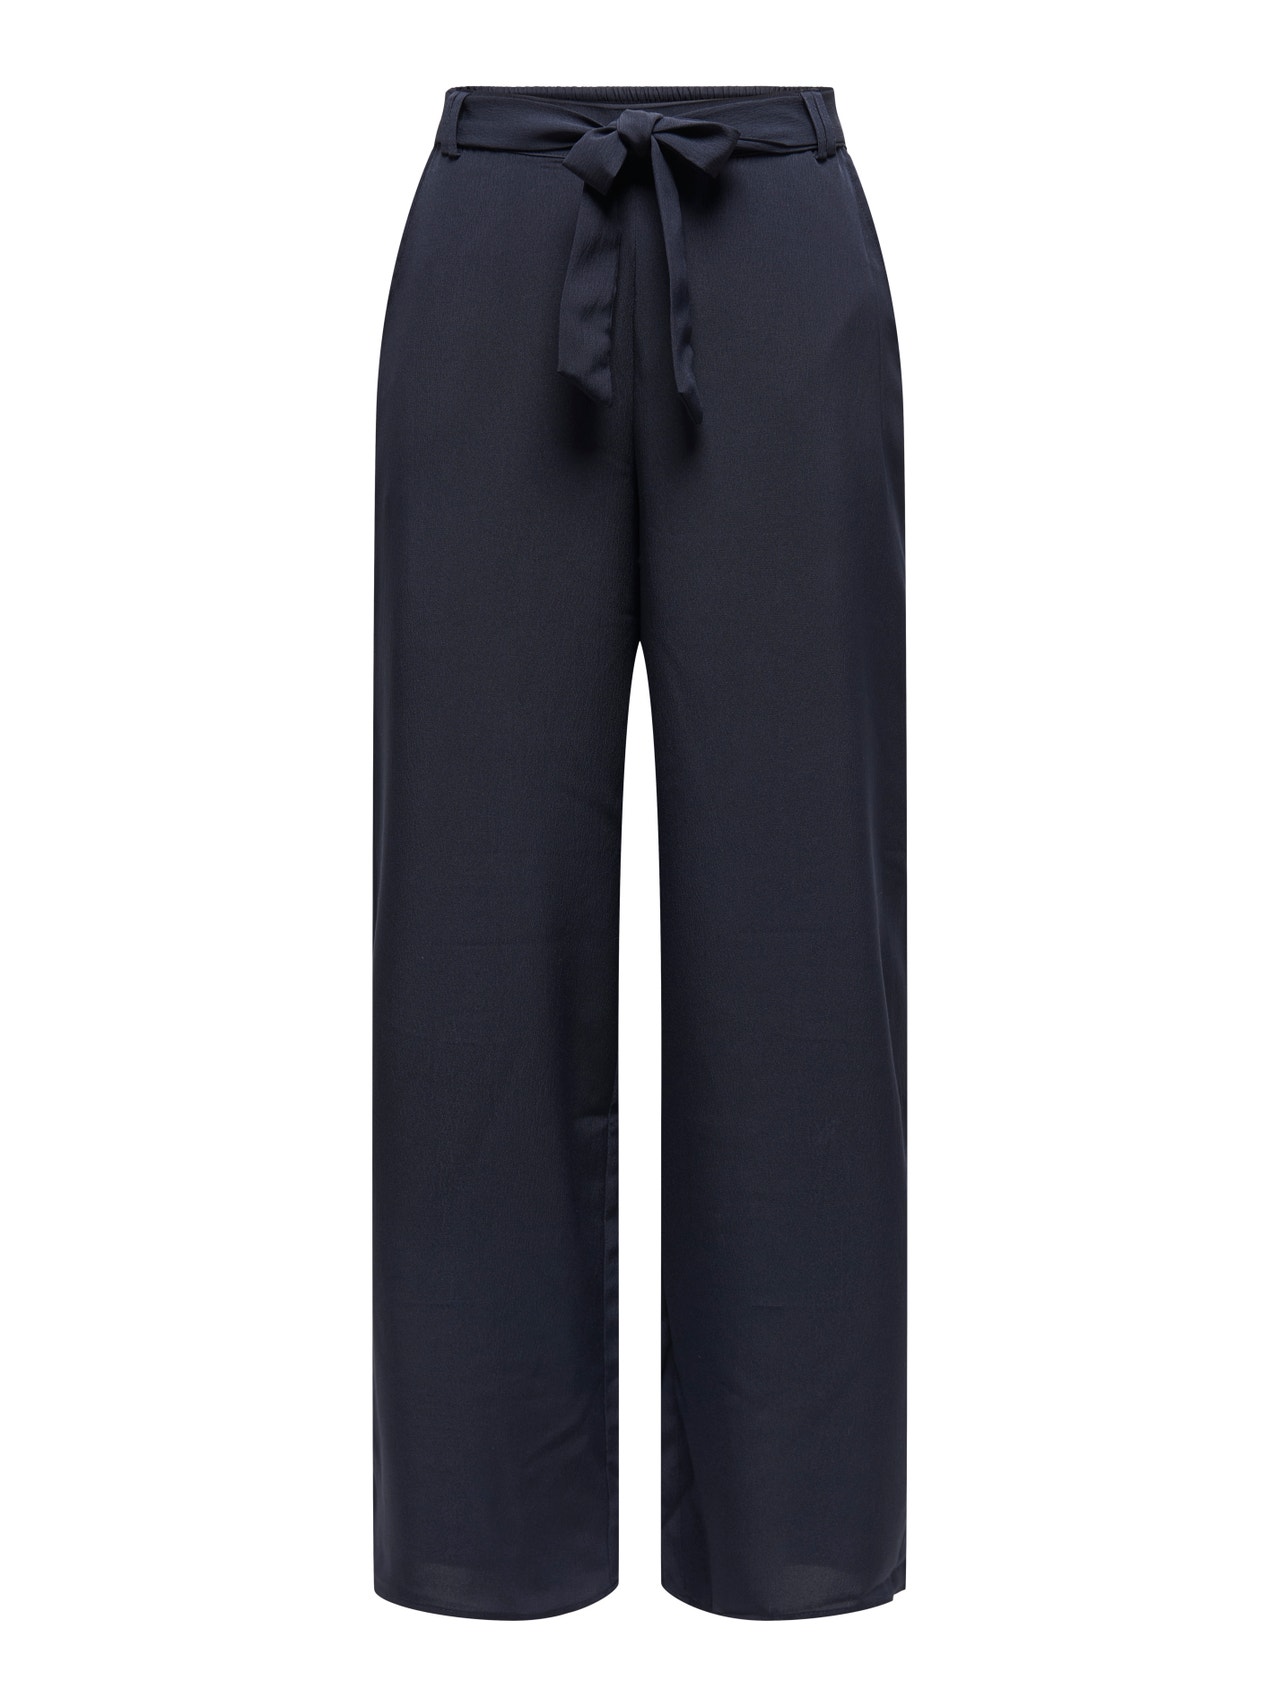 ONLY Regular Fit Trousers -Night Sky - 15335560